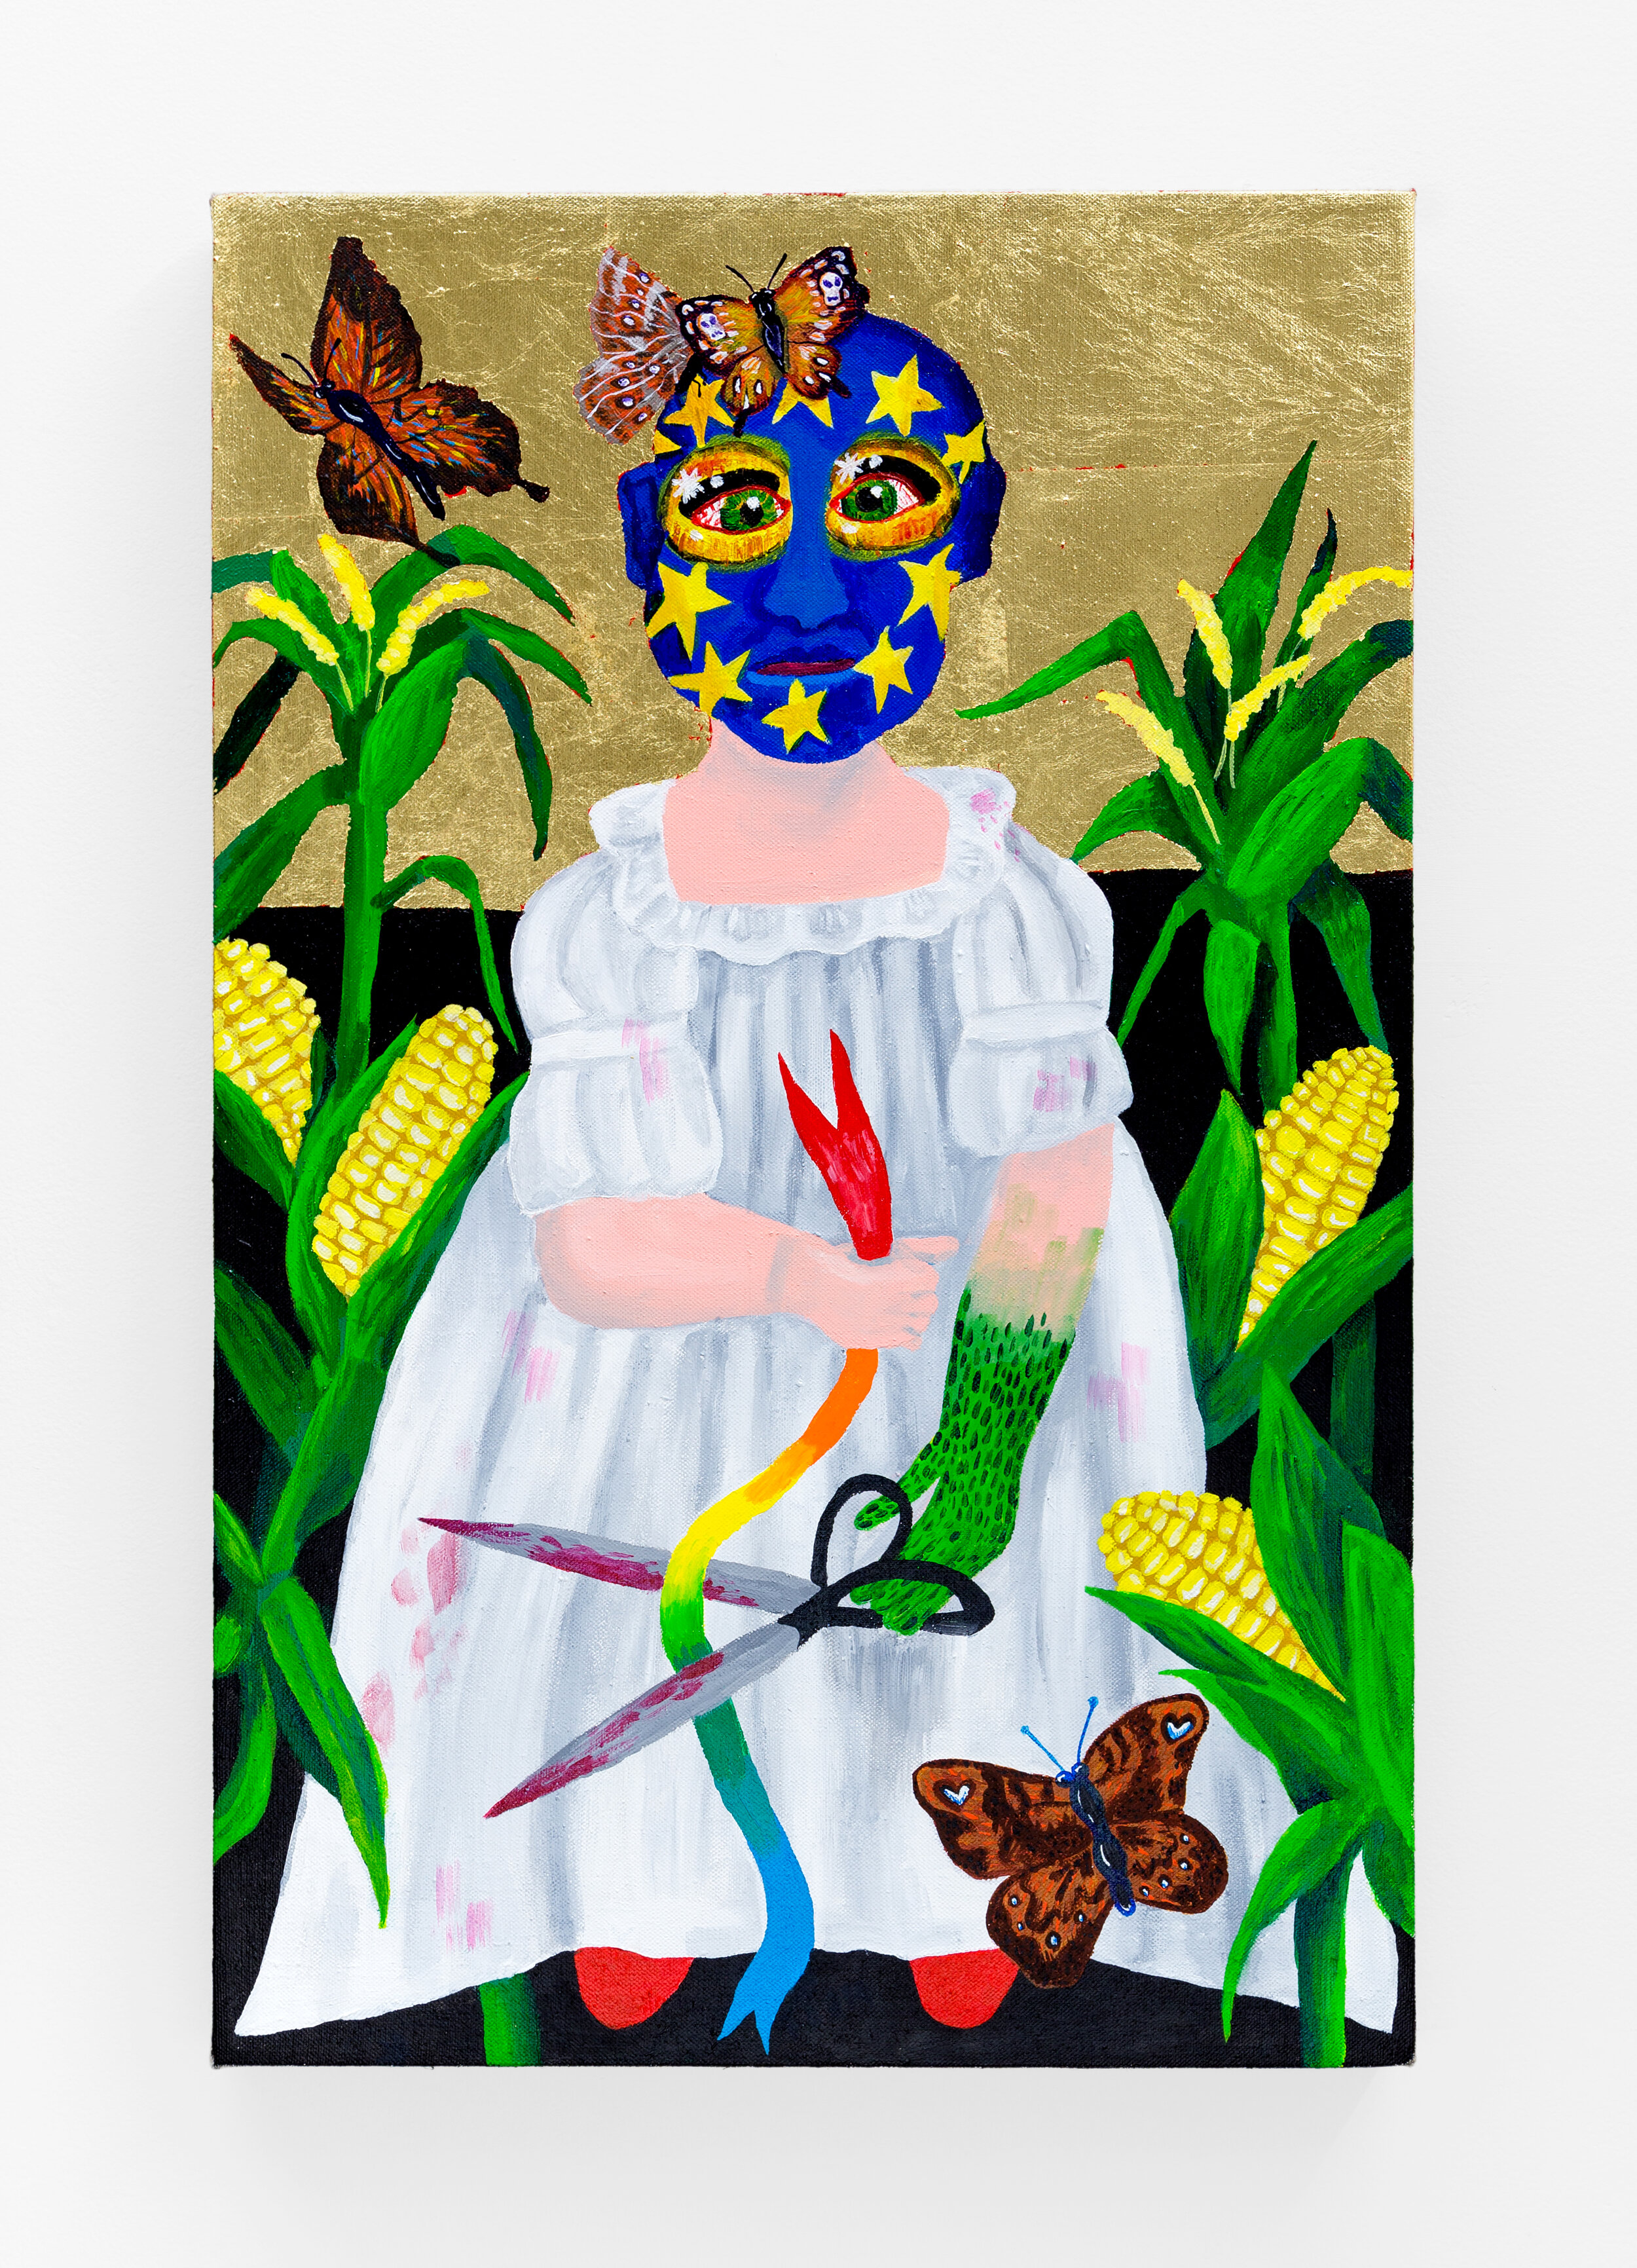   Girl with Goat Eyes Face Paint and Corn , 2018  24 x 15.24 x 1.5 inches (60.96 x 38.71 x 3.81 cm.)  Acrylic and gold leaf on linen  Private collection, New York 